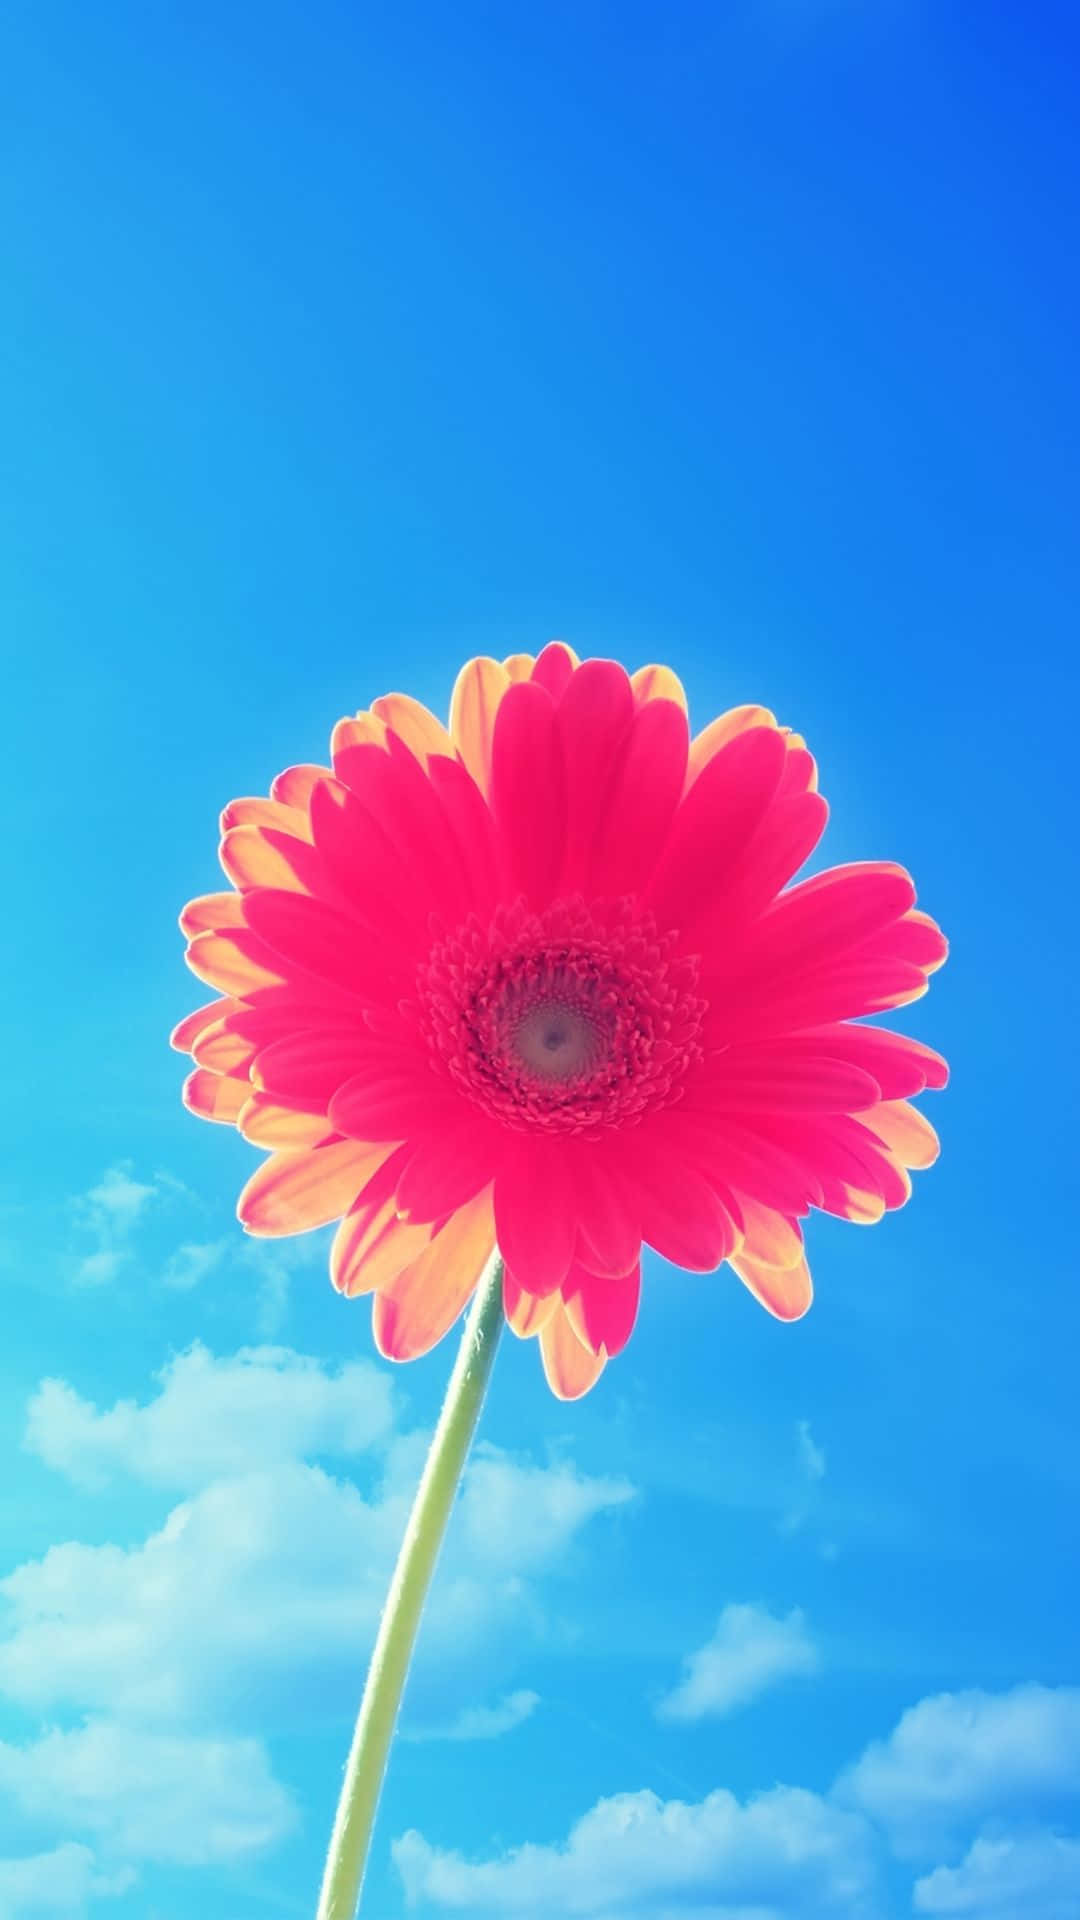 Caption: Enchanting Blossom - A vivid display of floral beauty directly on your iPhone screen.